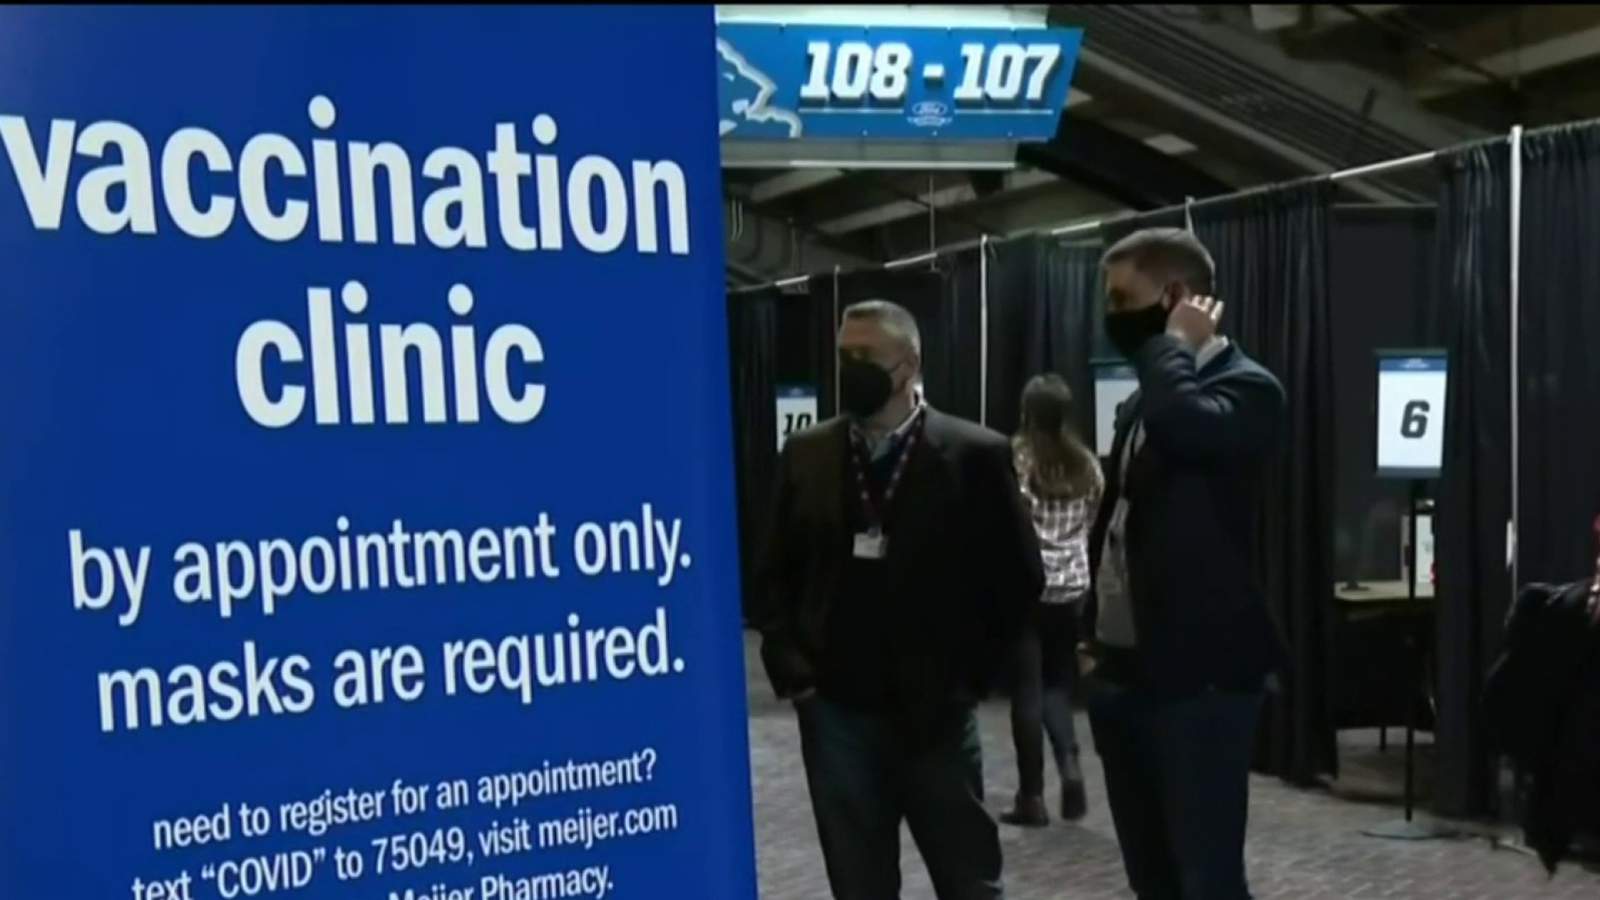 4 hard-hit Metro Detroit areas to get first vaccine appointments at Ford Field